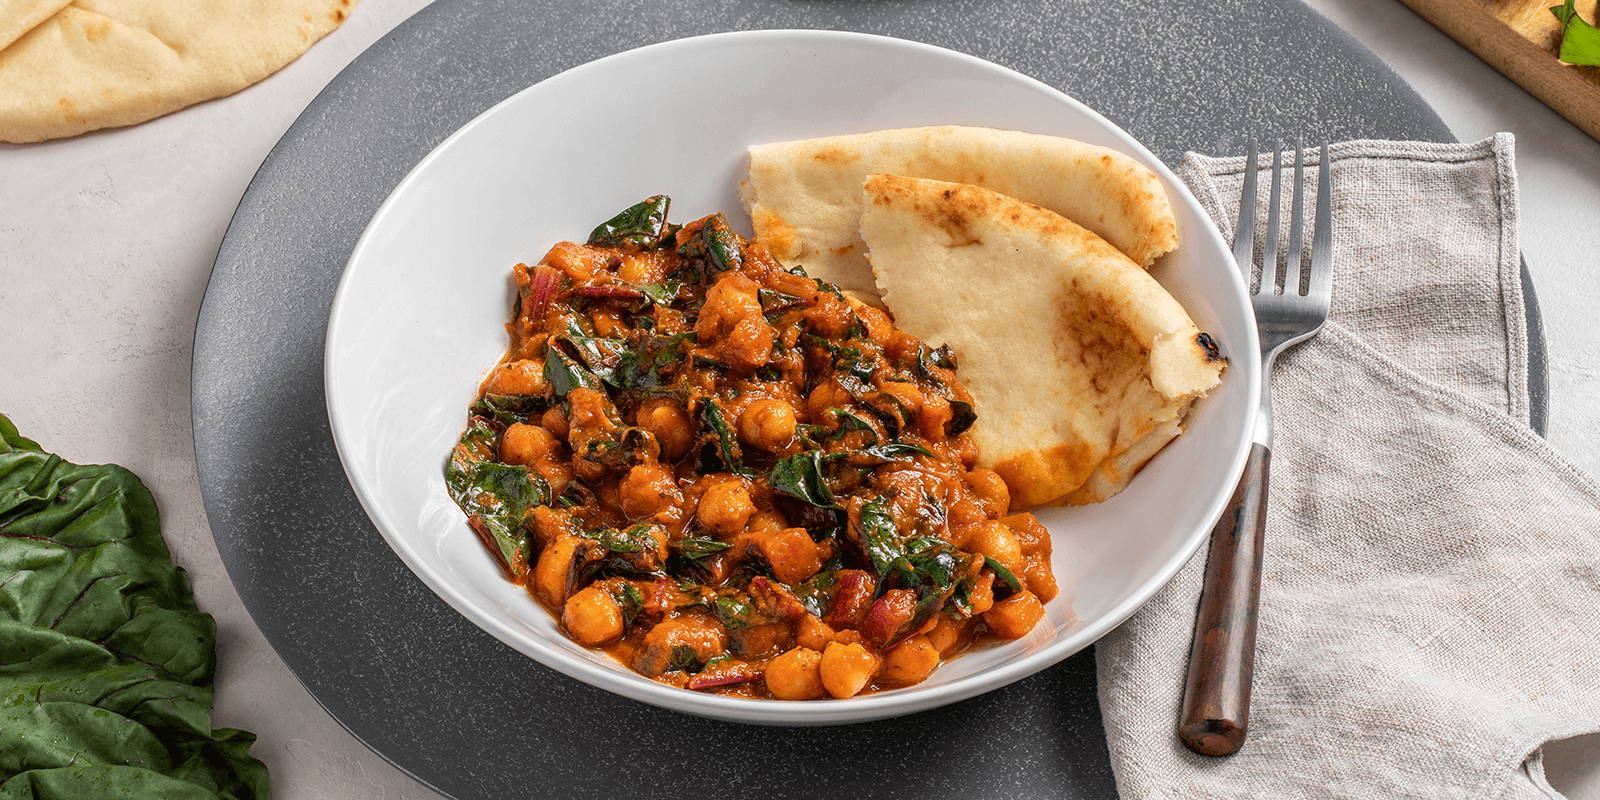 The prepared ZENB Tomato Braised Chickpeas with Swiss Chard recipe, with naan on the side, in a white bowl atop a gray charger plate.